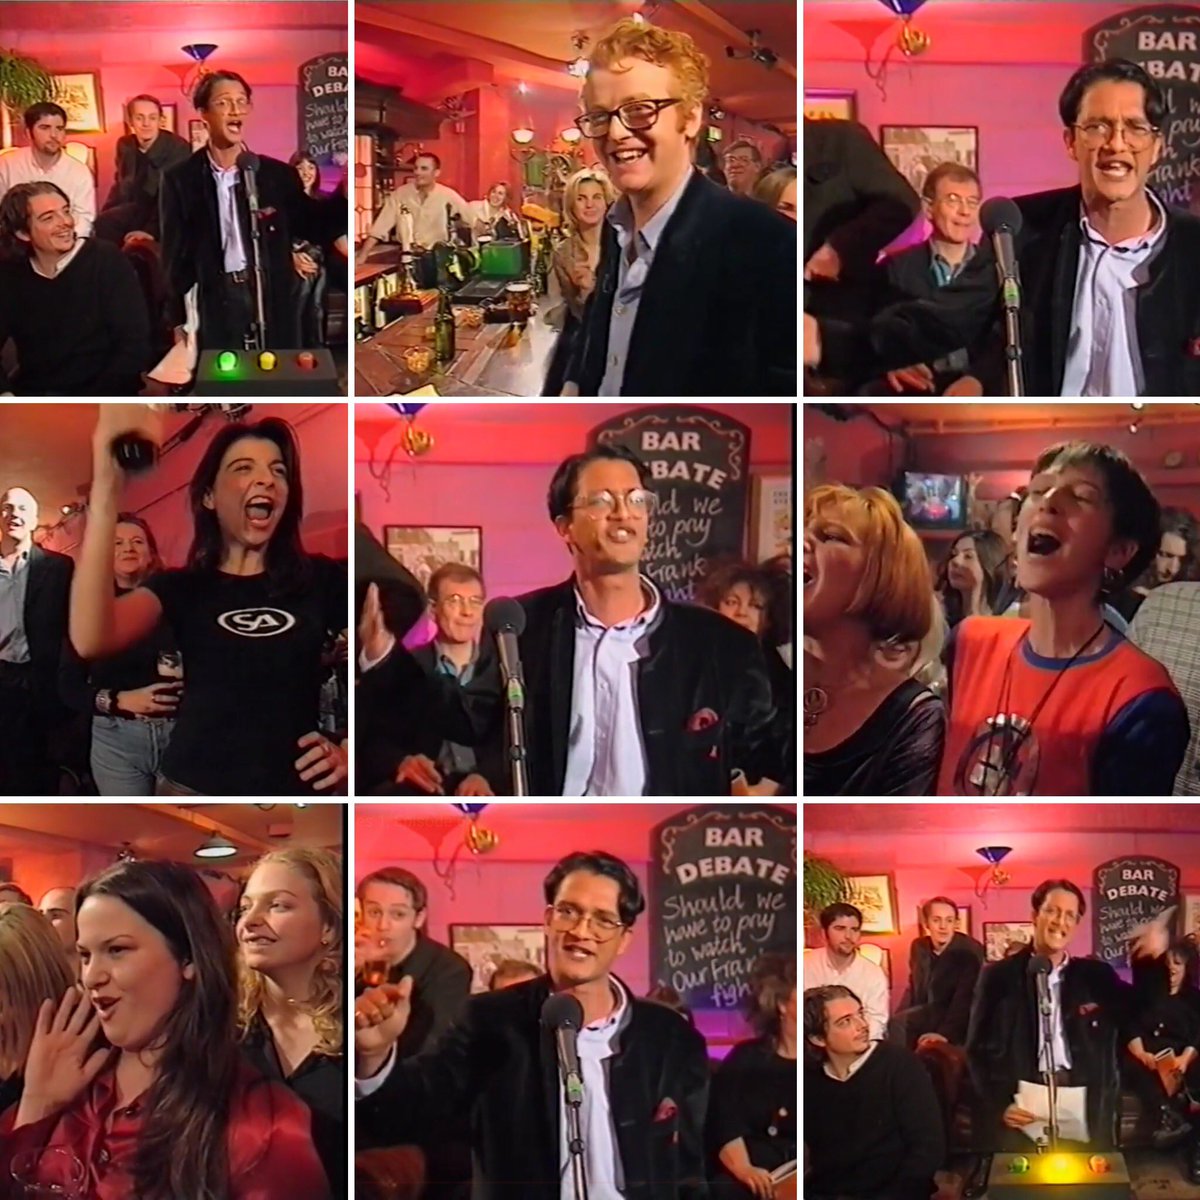 21. Velvet Nehru Jacket and Classic mid-90s floppy-hair mid-parting (15/3/96 Chris Evan’s’ #TFIFriday “The Bar Debate”)